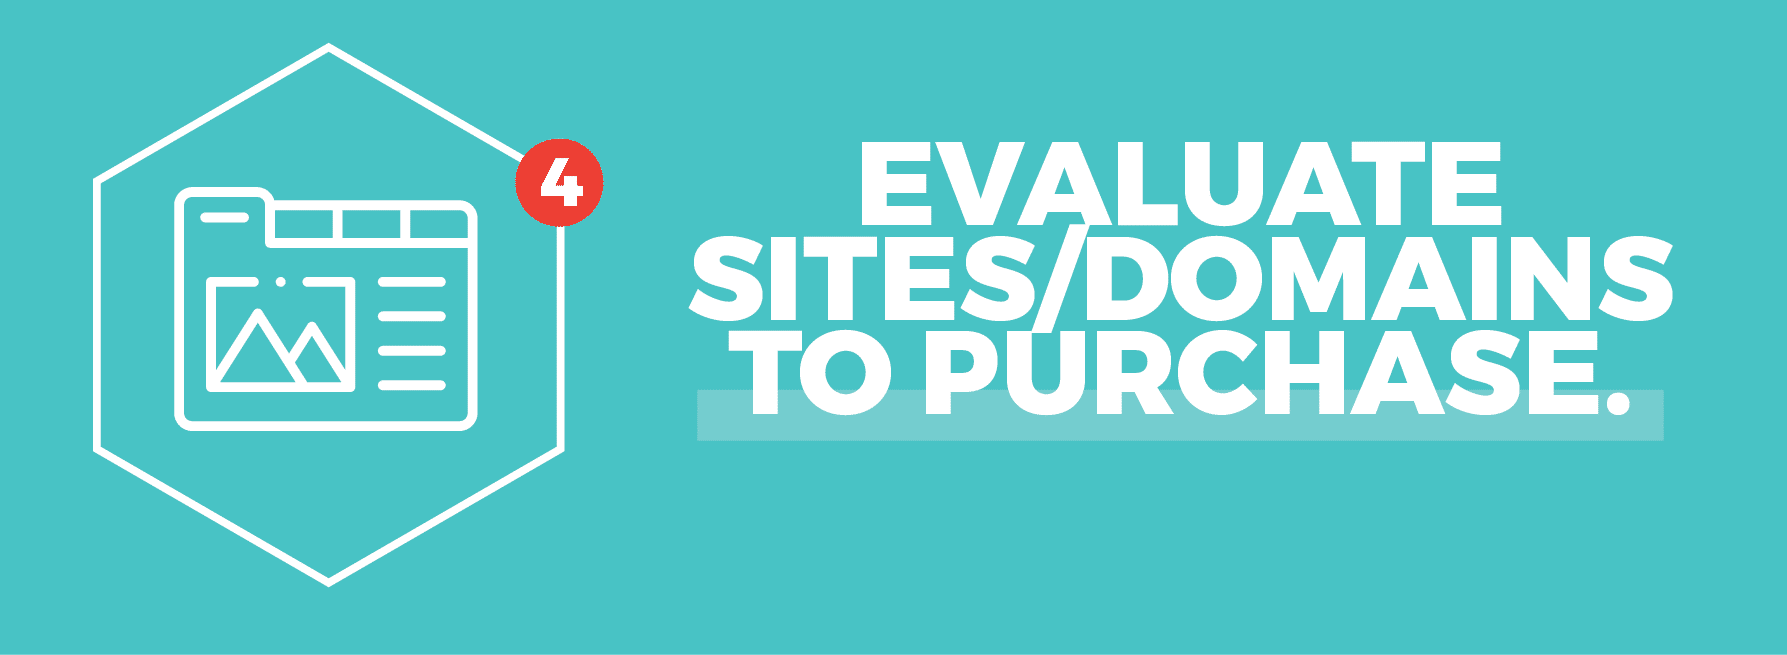 Evaluate sites/domains to purchase